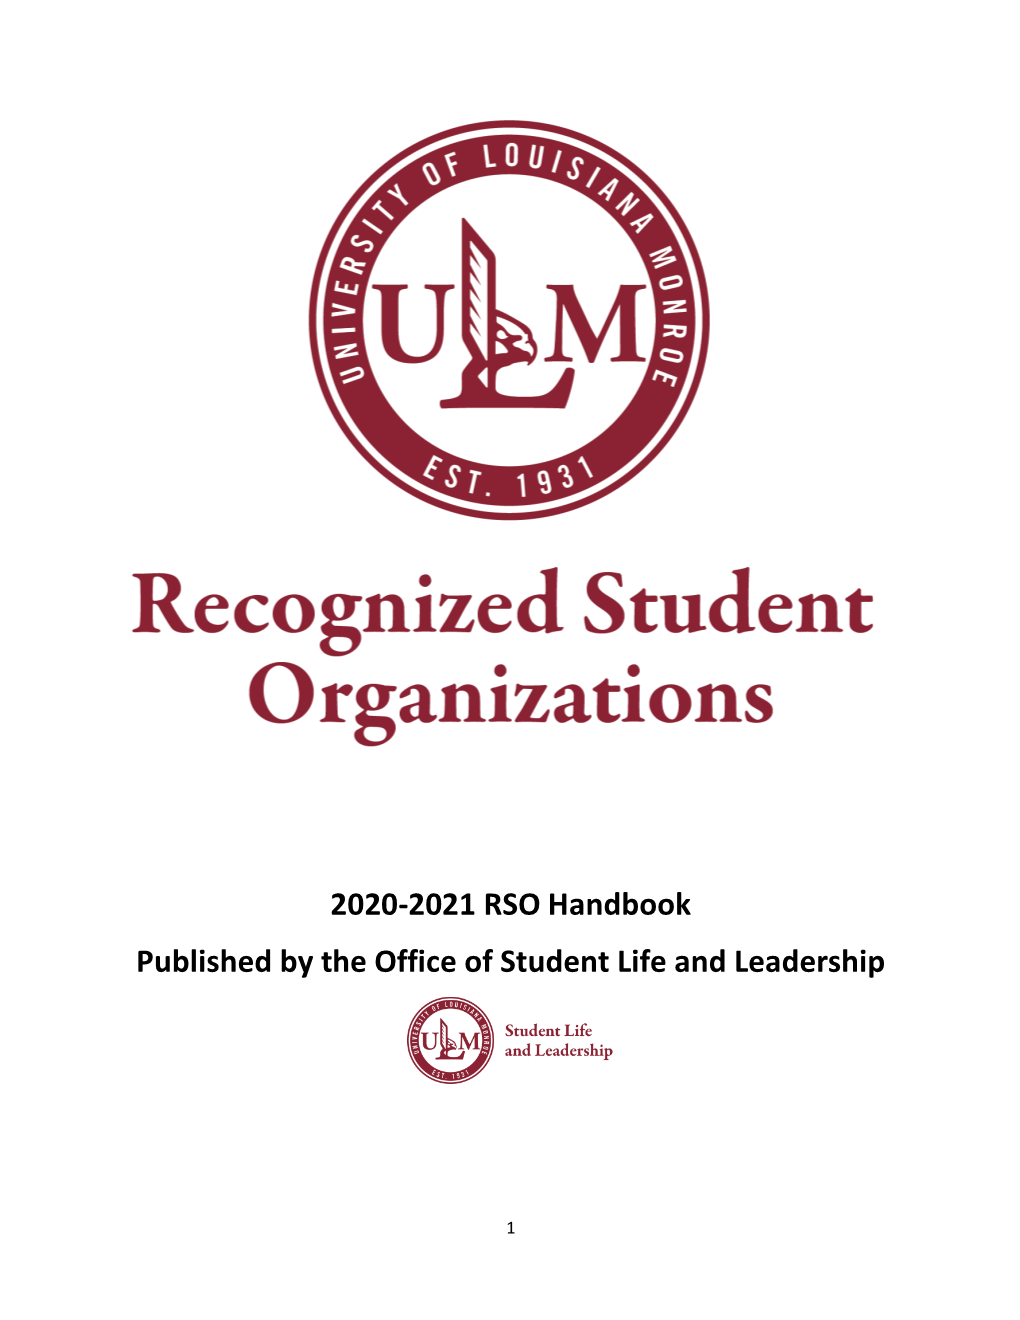 2020-2021 RSO Handbook Published by the Office of Student Life and Leadership